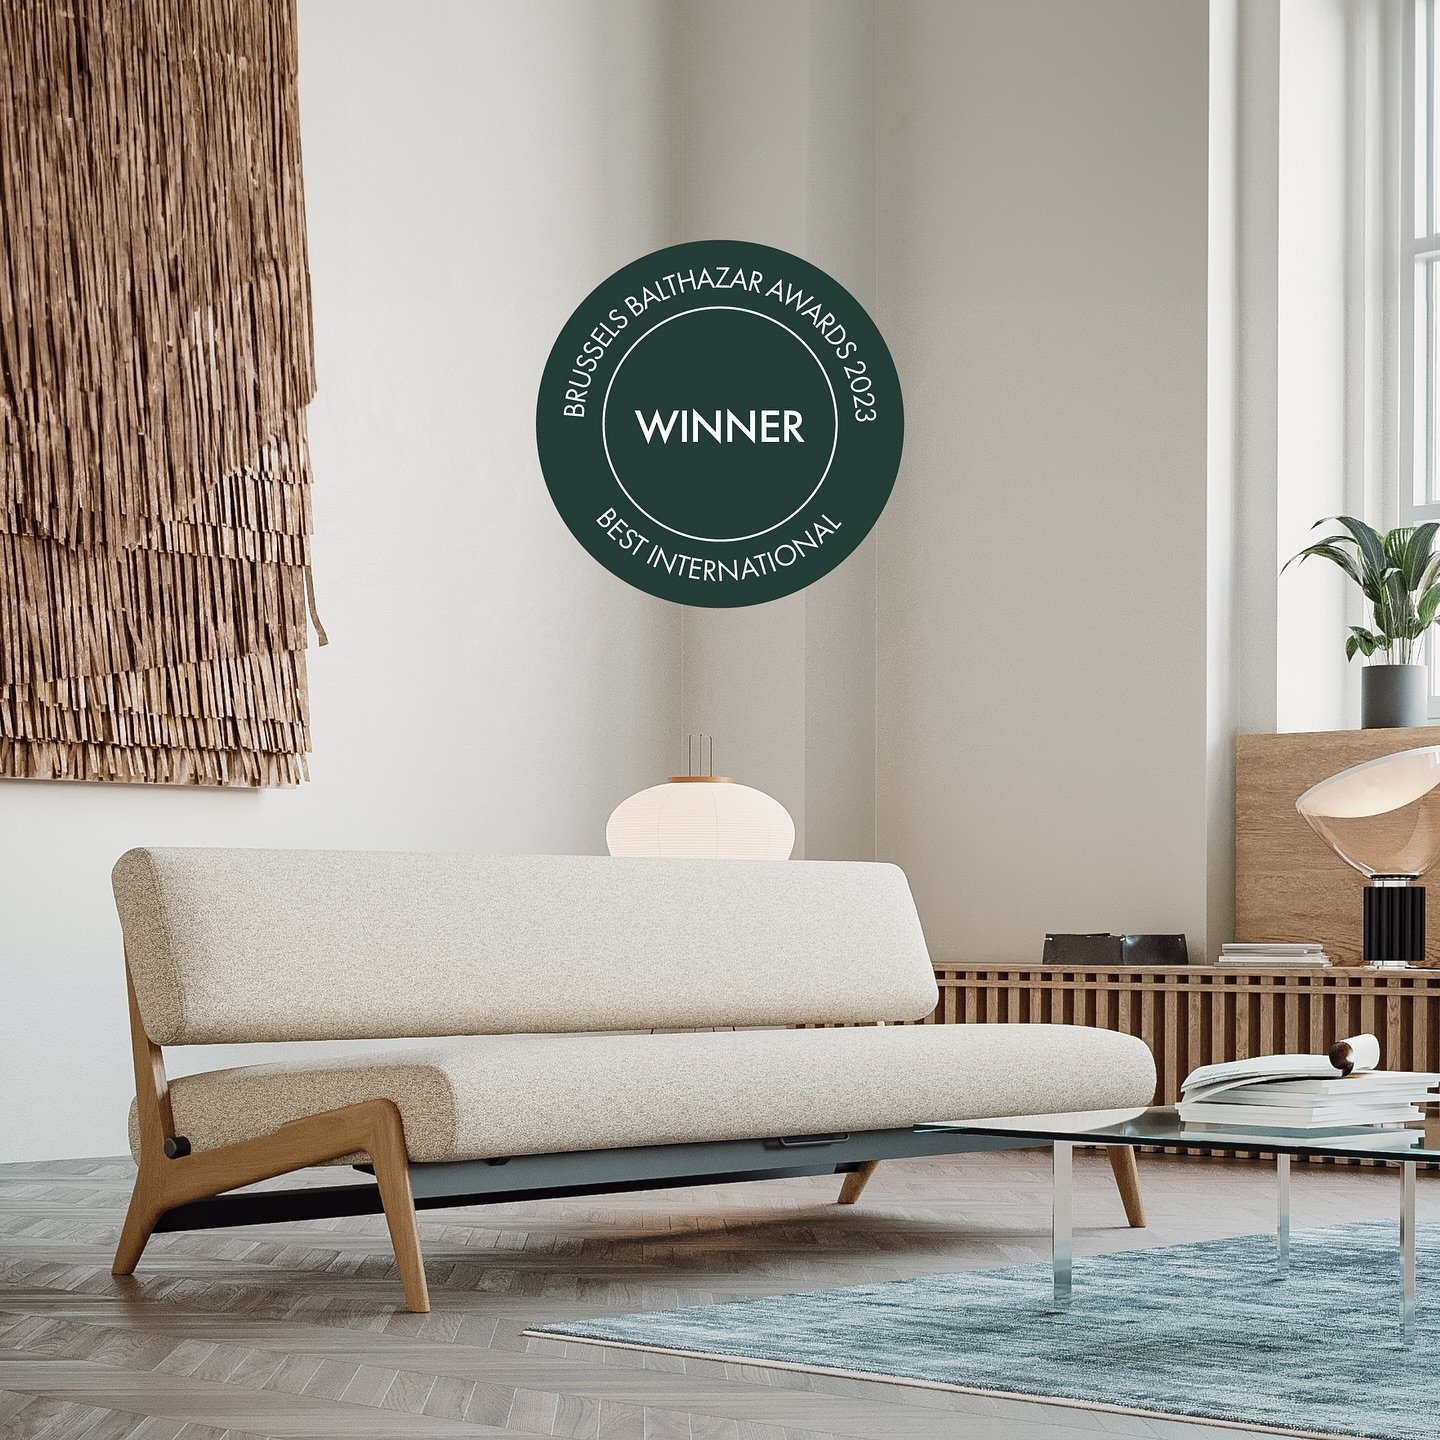 We are proud to announce that Nolis Daybed has won the Brussels Balthazar Award 2023 in the category Best International. 

Nolis Daybed is designed for @innovationliving